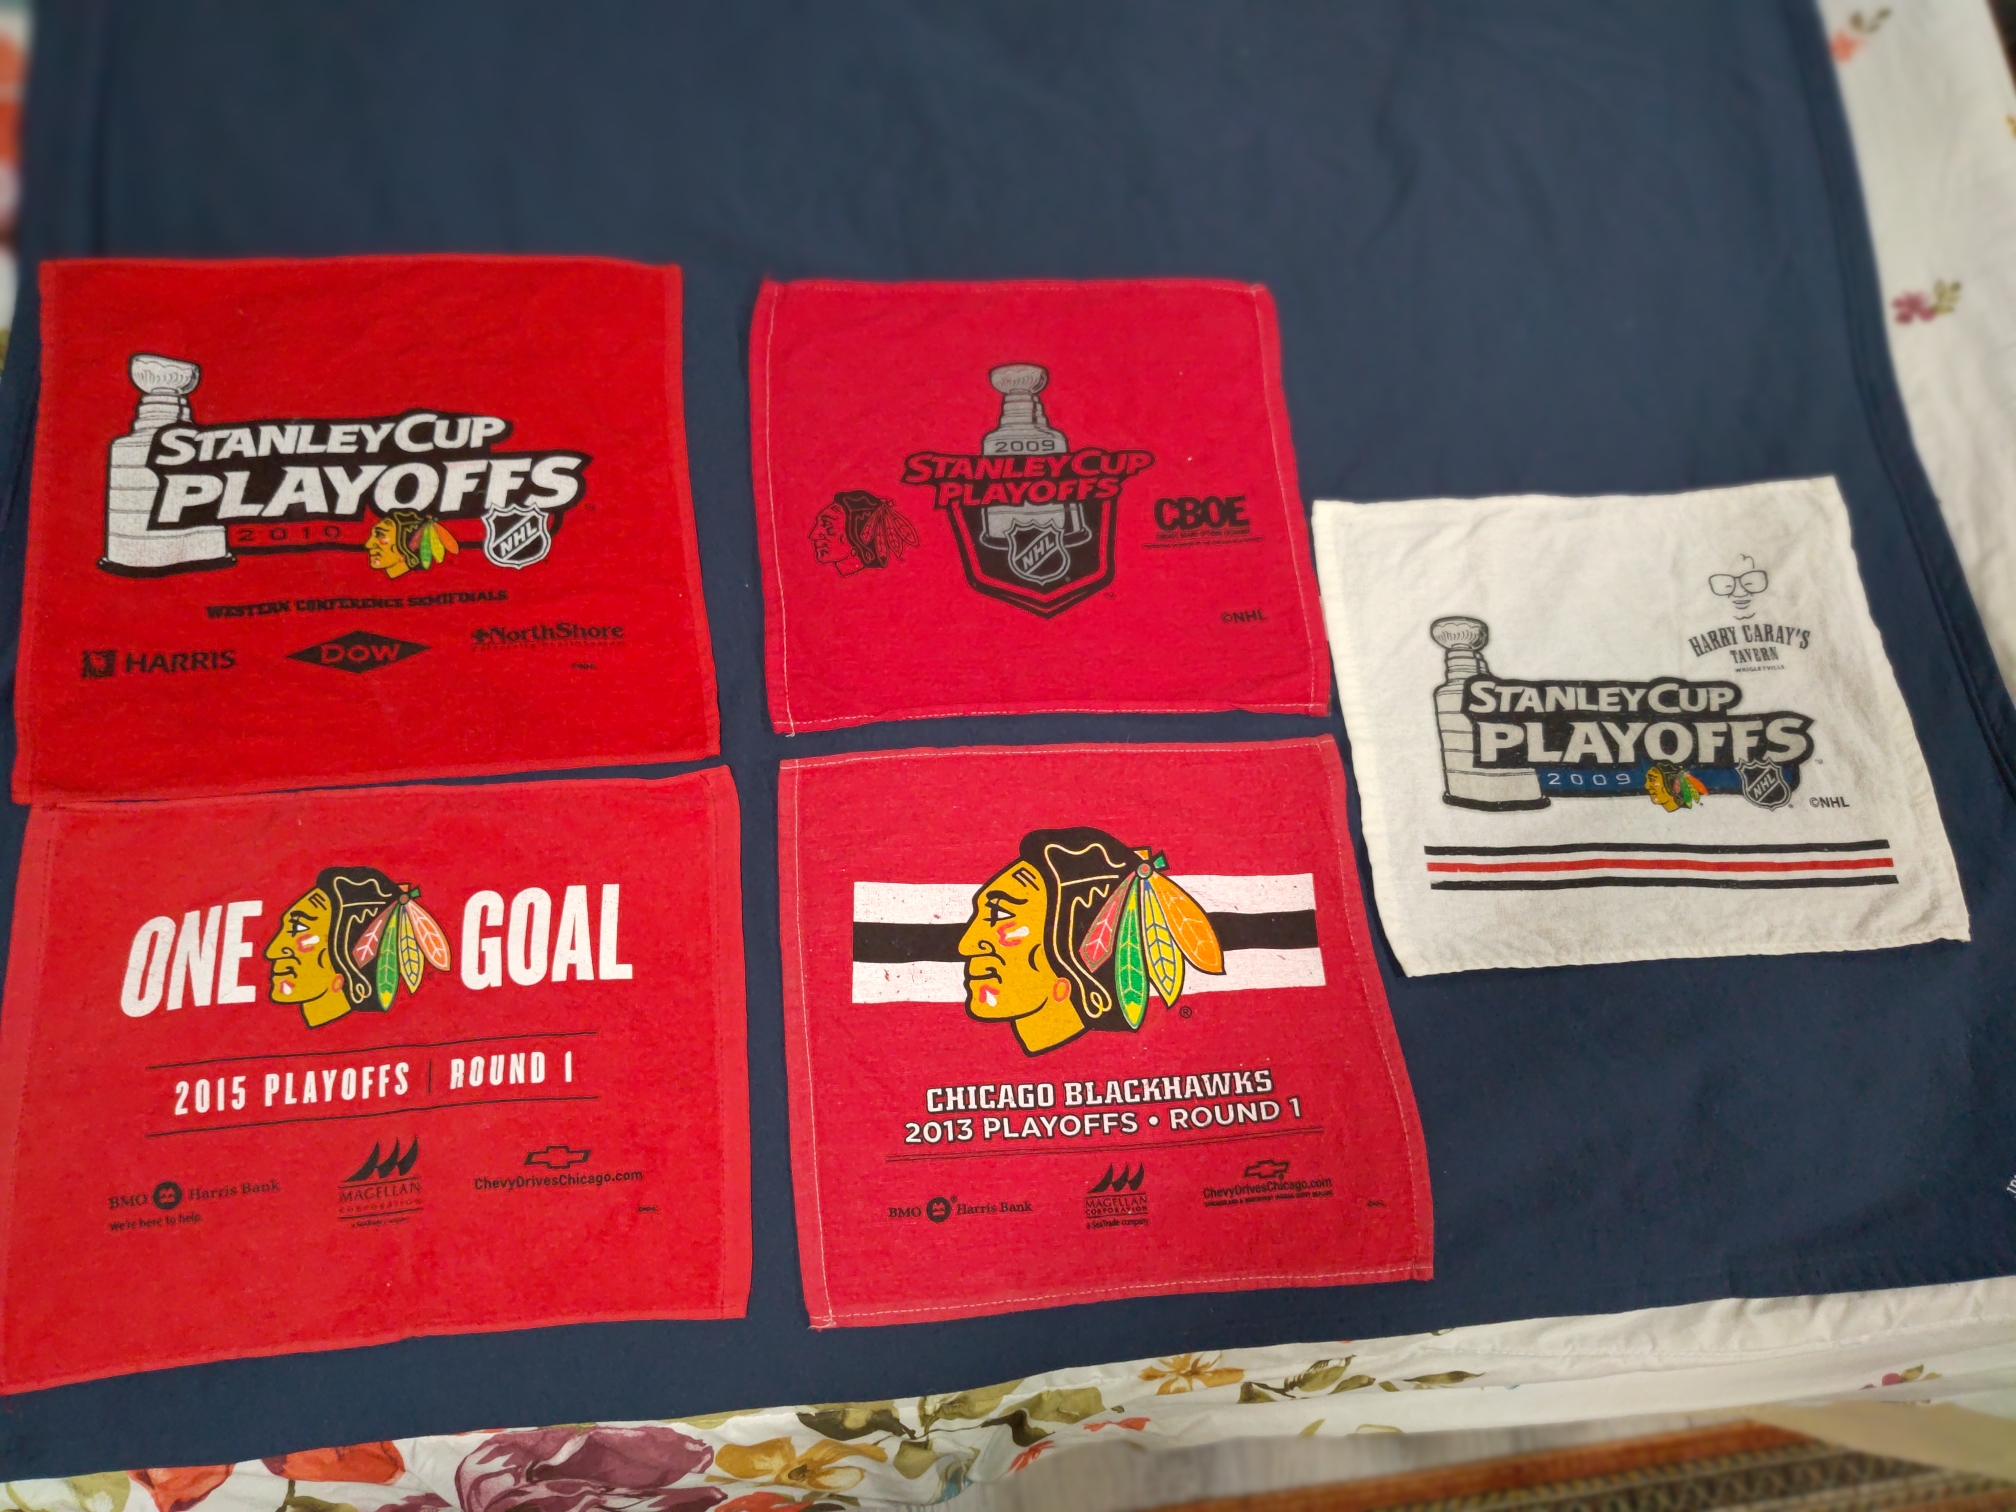 Chicago Blackhawks Vintage Rally Towels from the good years